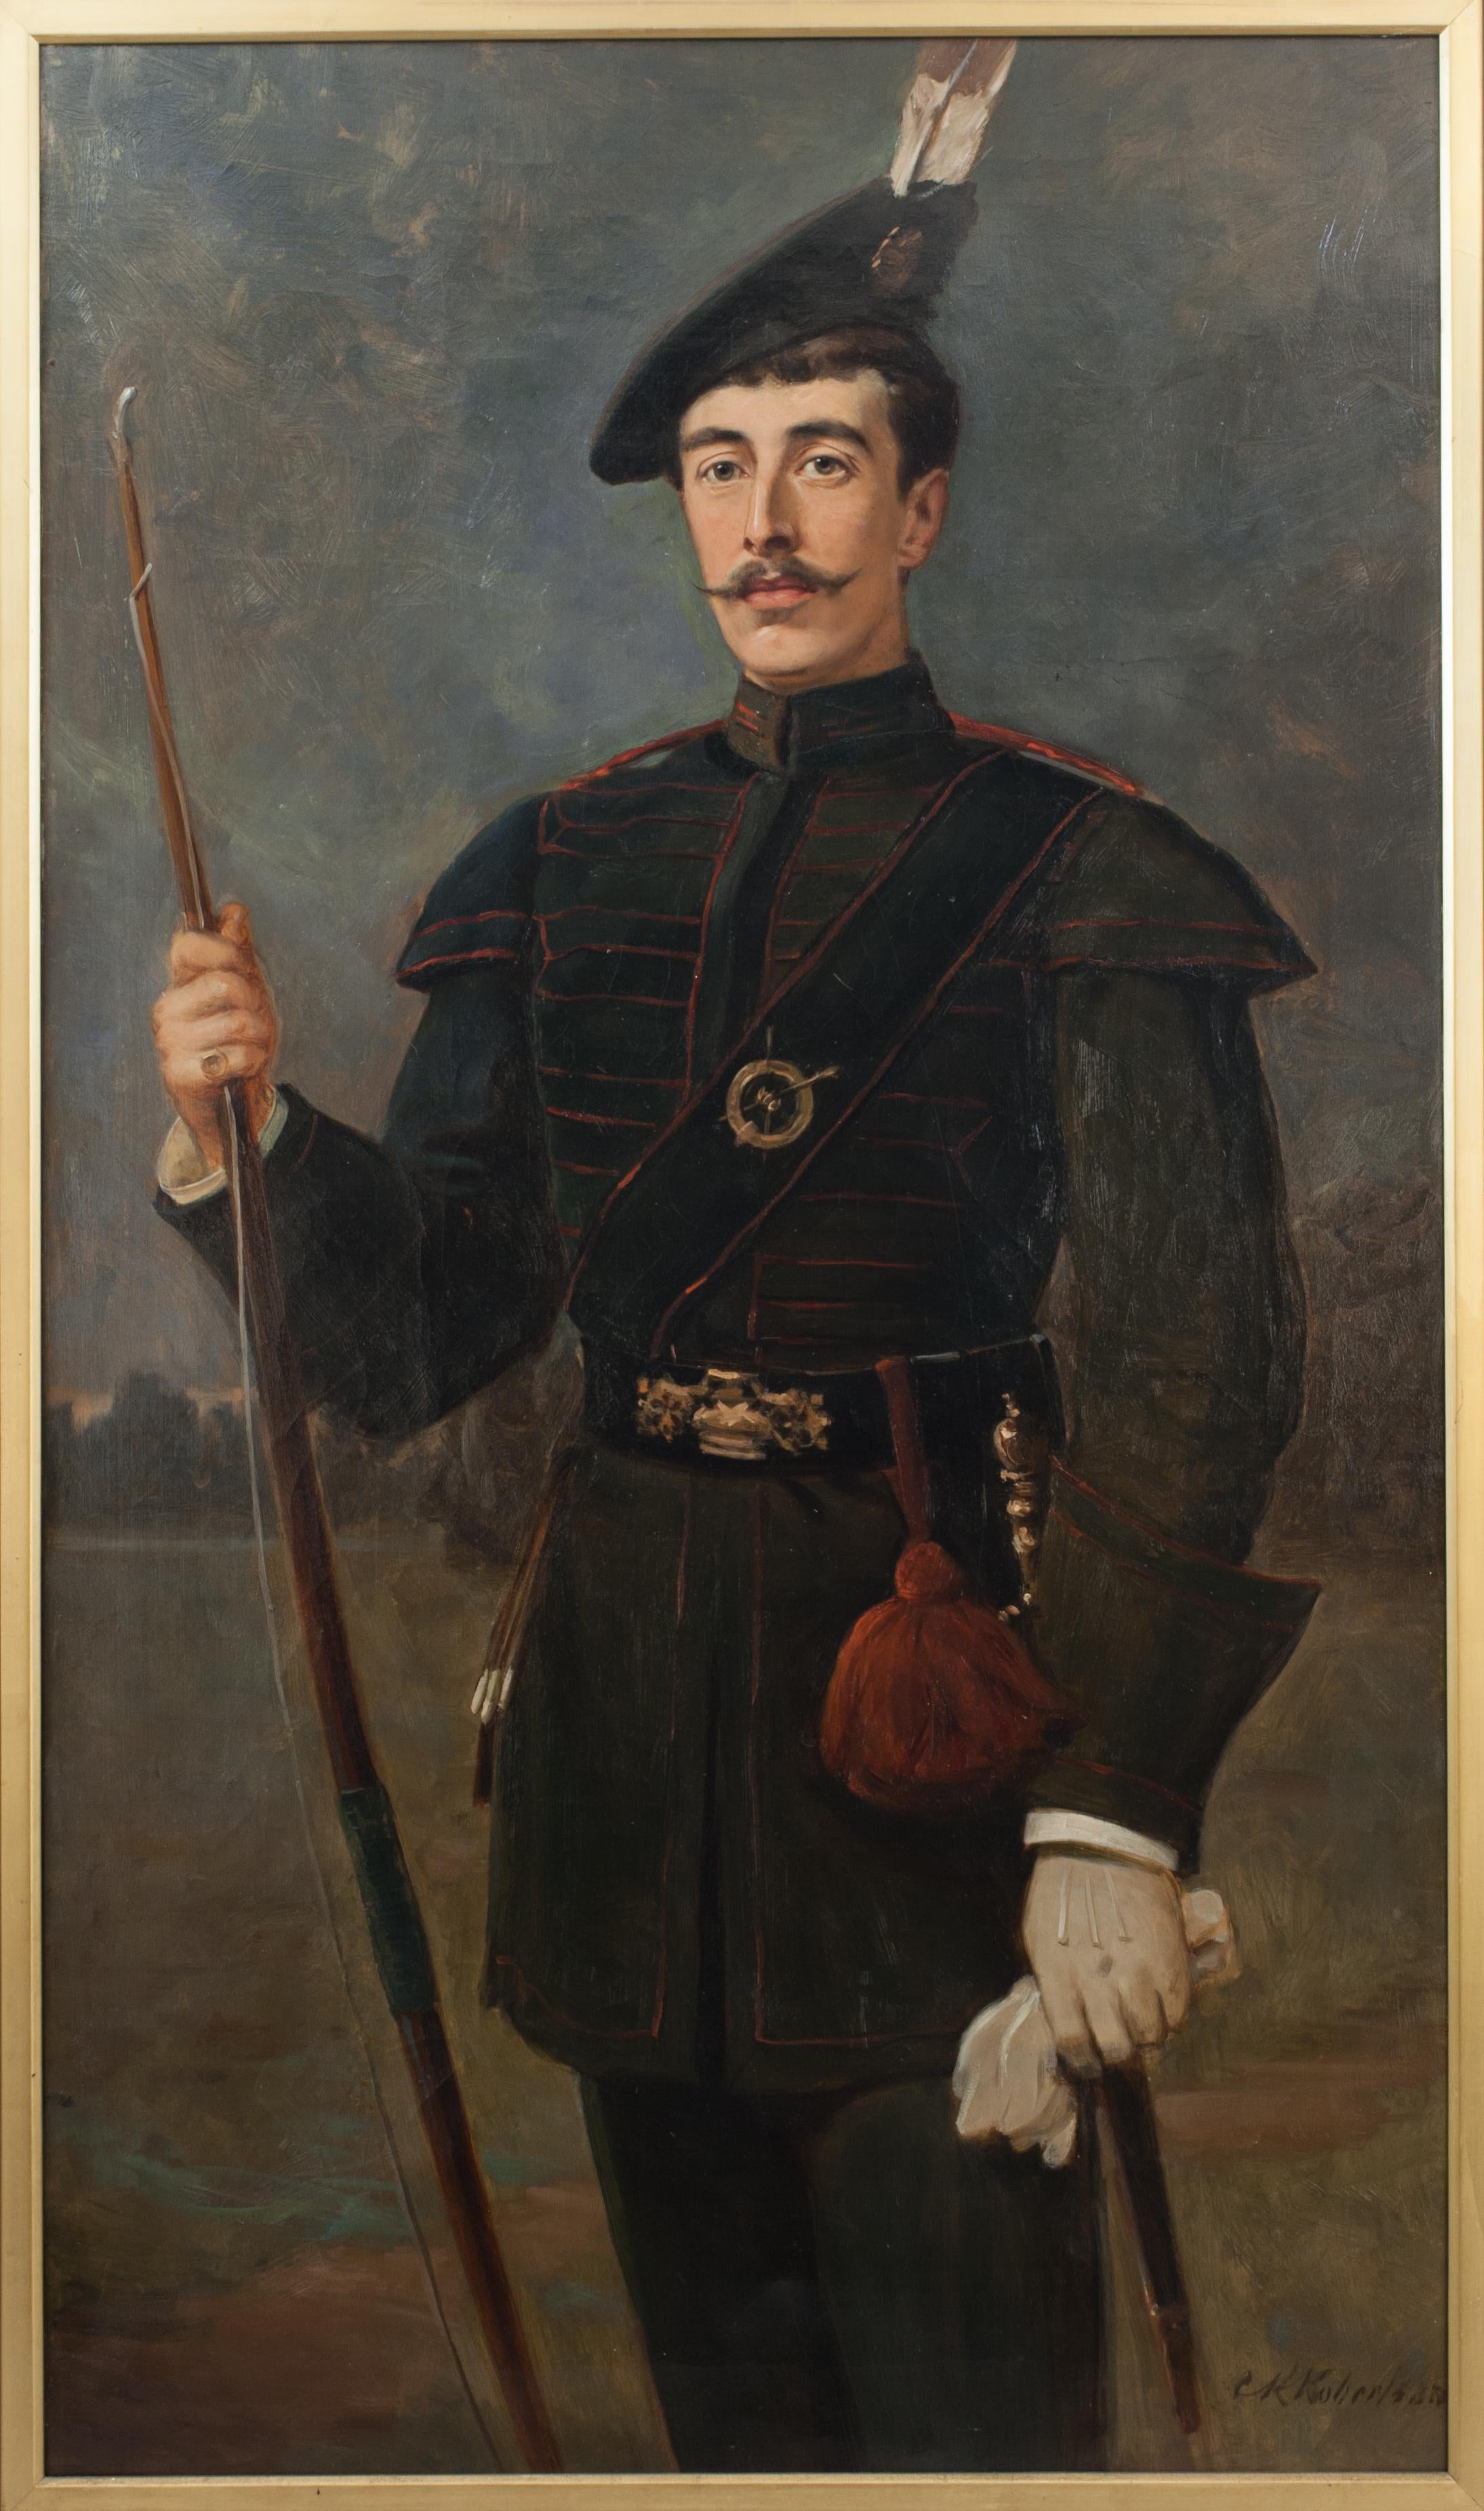 Sporting Art Oil Painting of a Member of the Royal Company of Archers